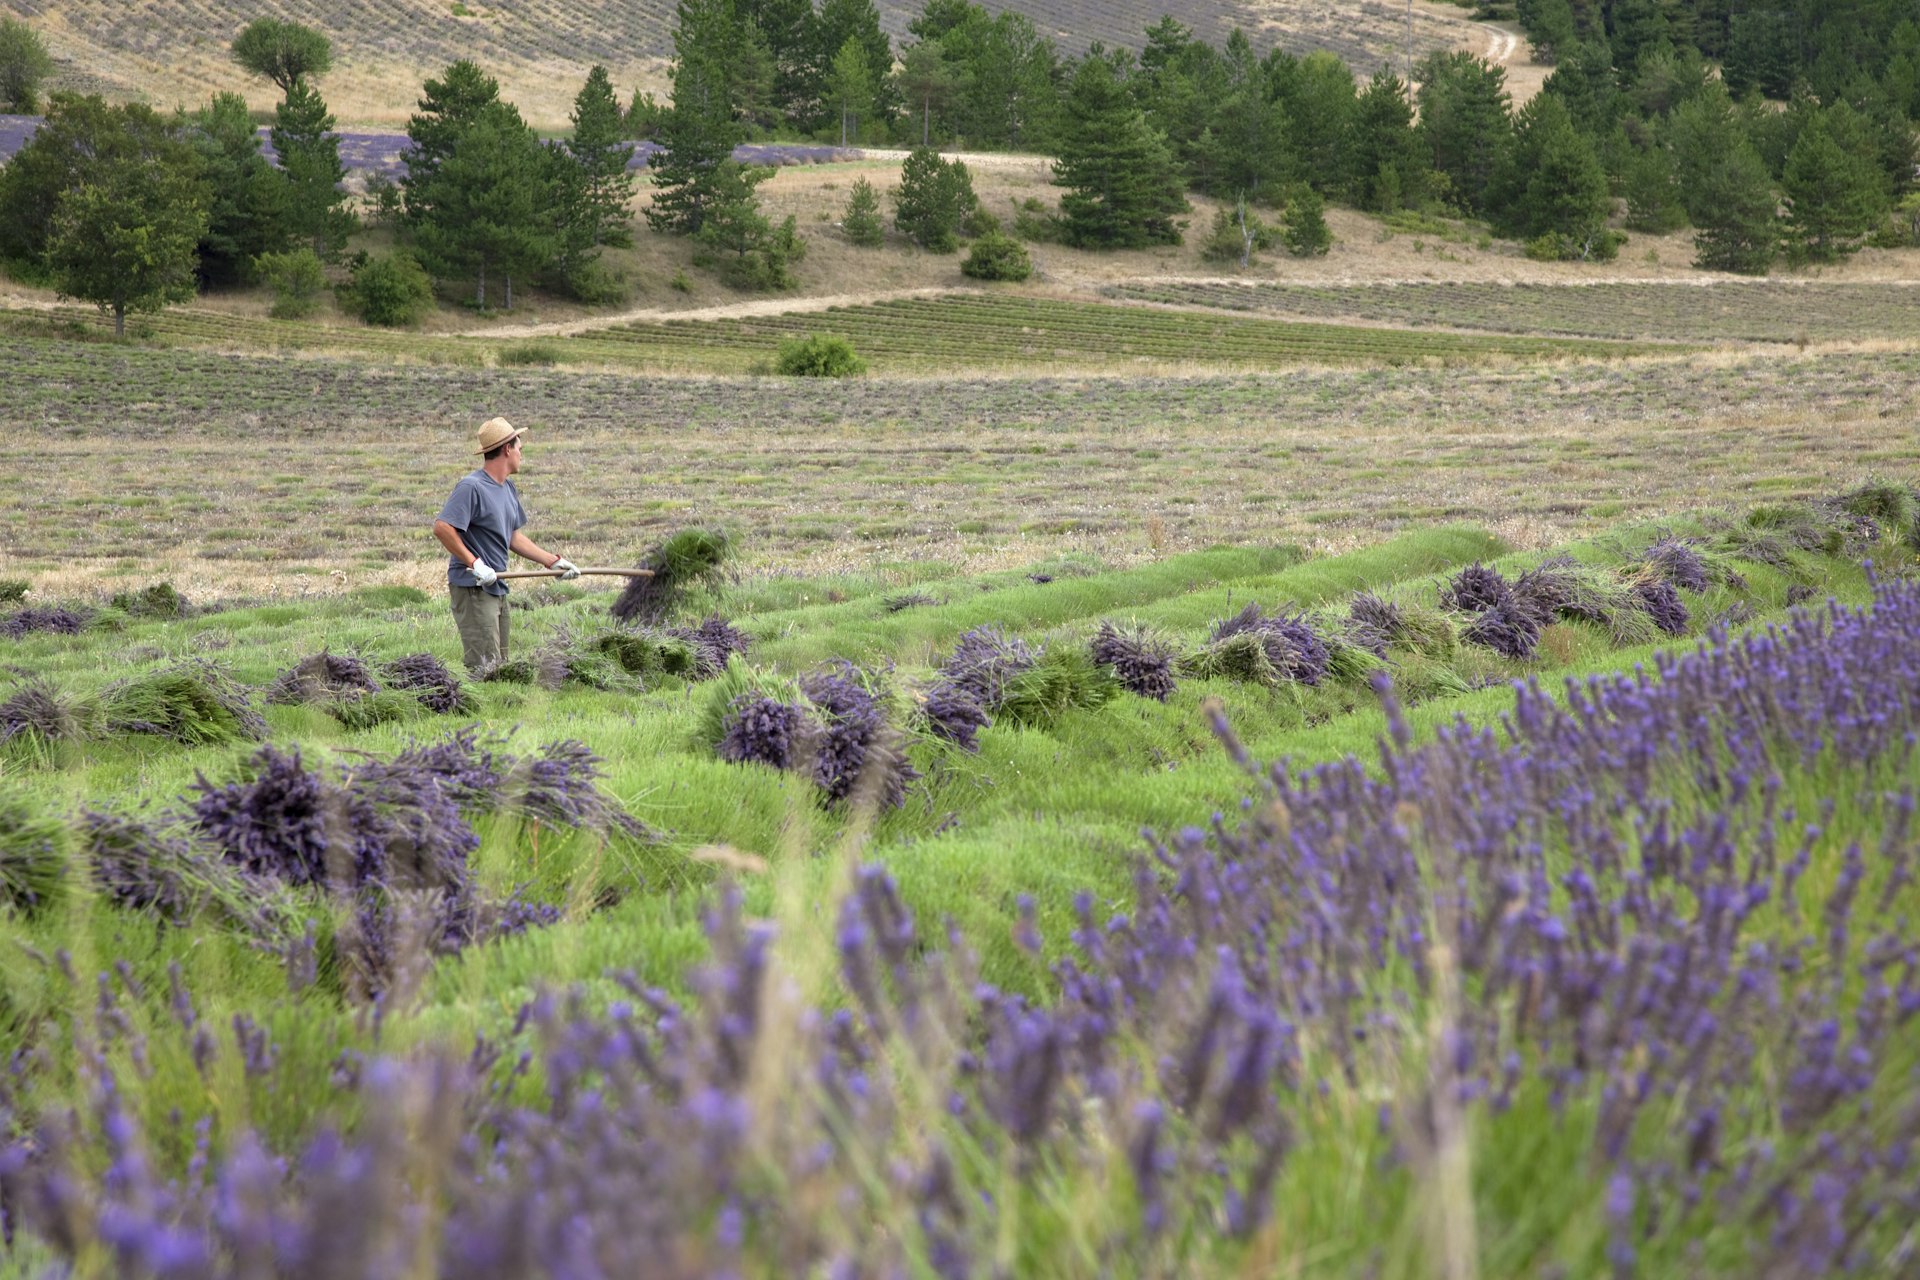 Young man harvesting lavender with pick fork, Sault, Provence